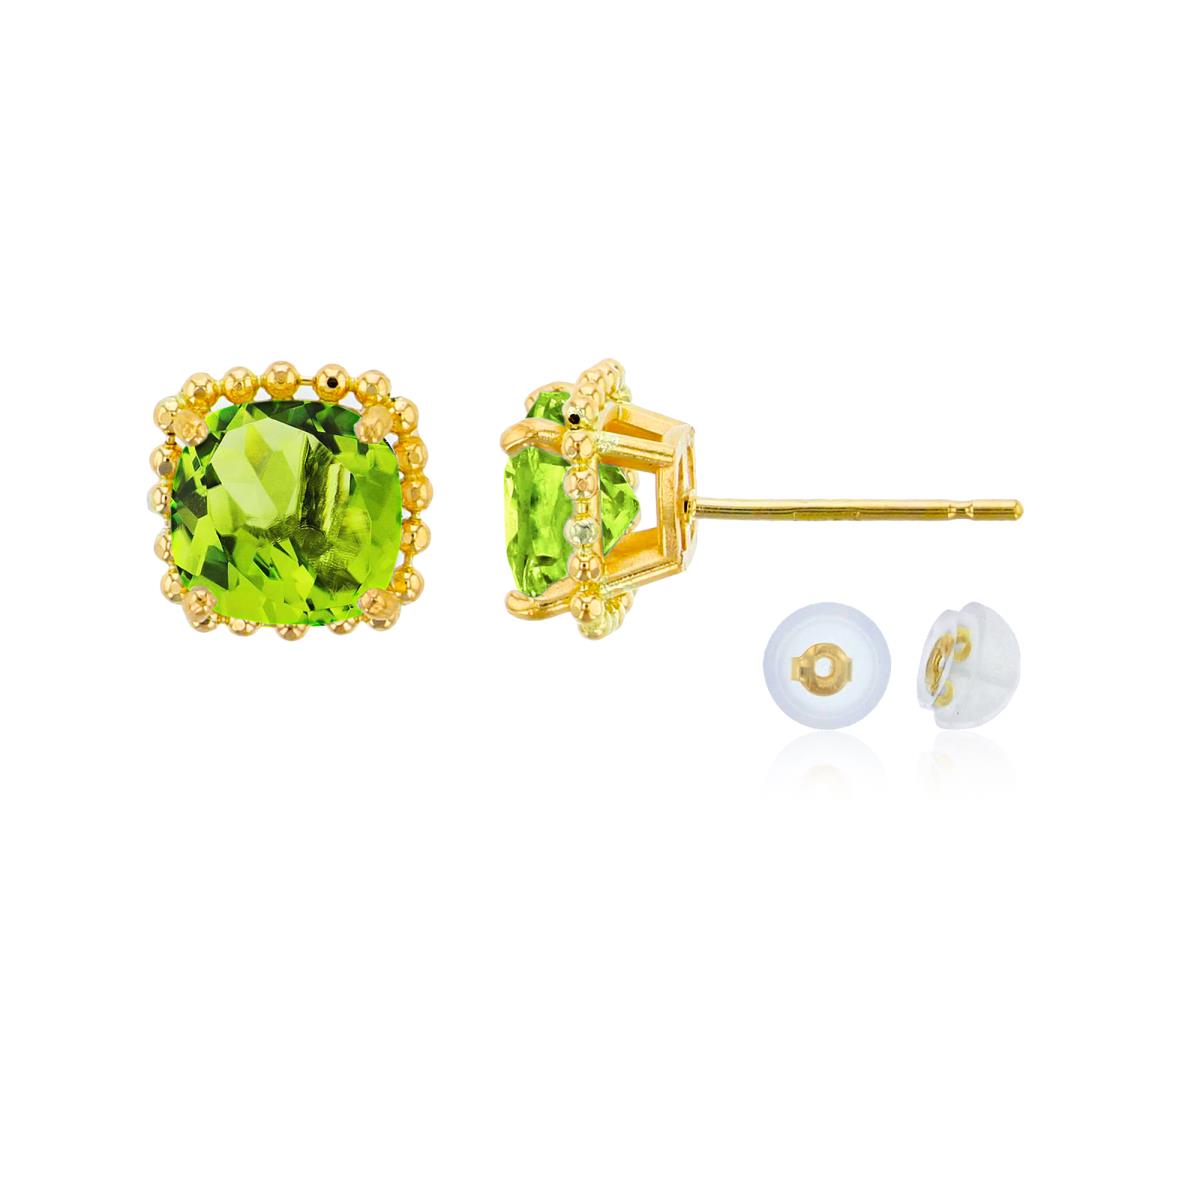 14K Yellow Gold 6x6mm Cushion Cut Peridot Bead Frame Stud Earring with Silicone Back